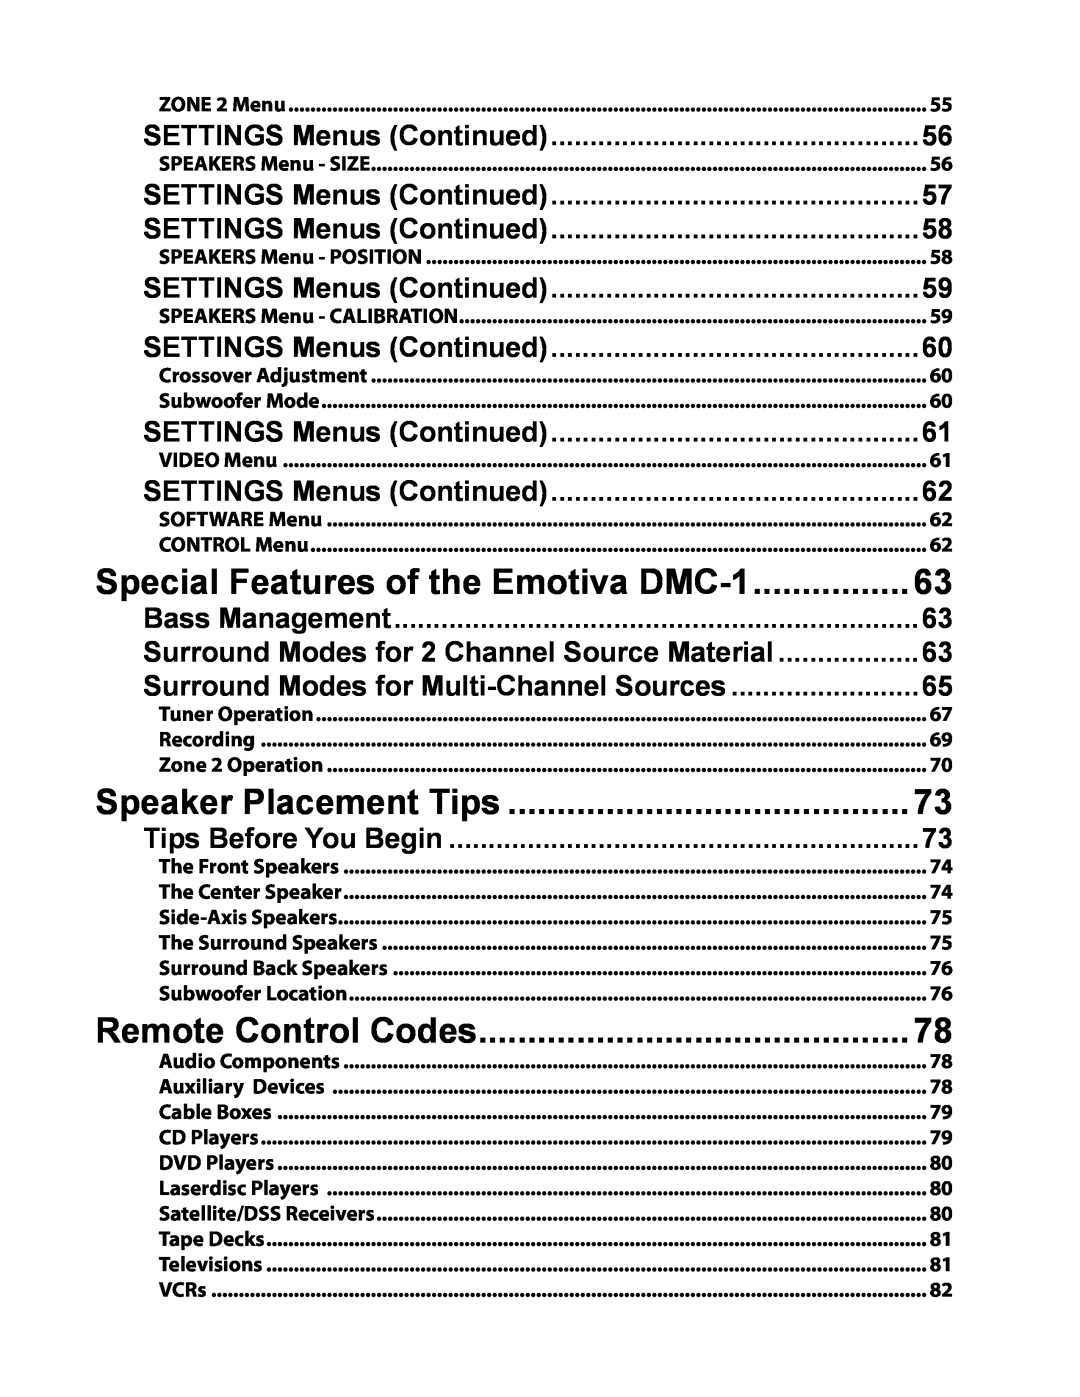 Emotiva manual Special Features of the Emotiva DMC-1, Speaker Placement Tips, Remote Control Codes 